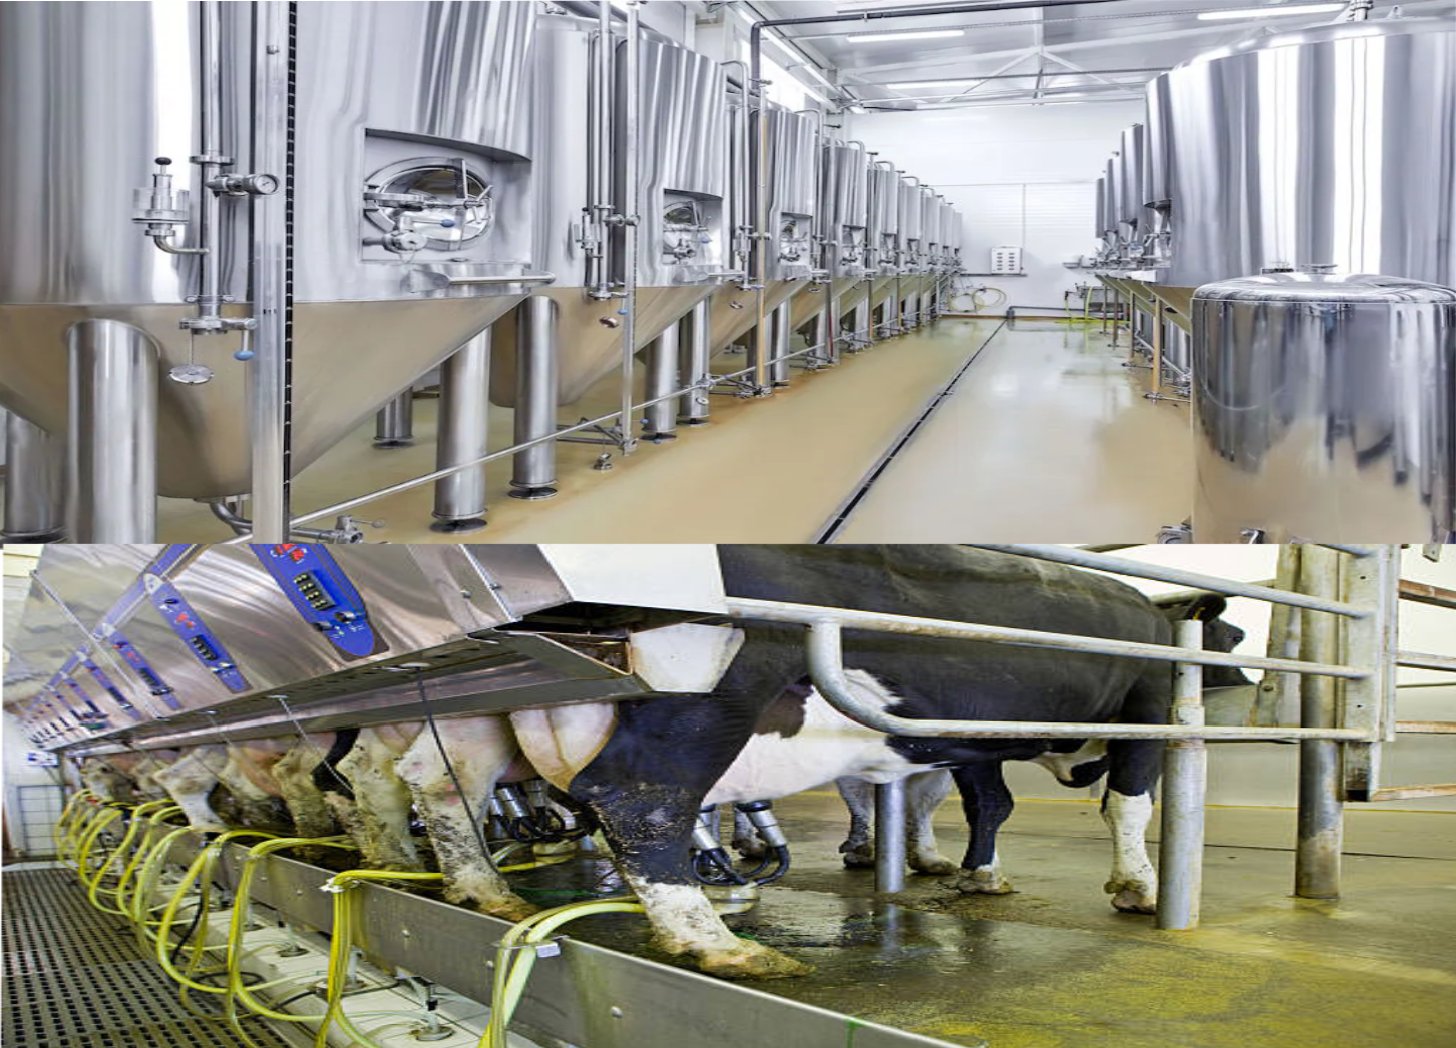 Two images comparing precision fermentation (sterile vats) and traditional dairy cow slavery (dirty and oppressive).